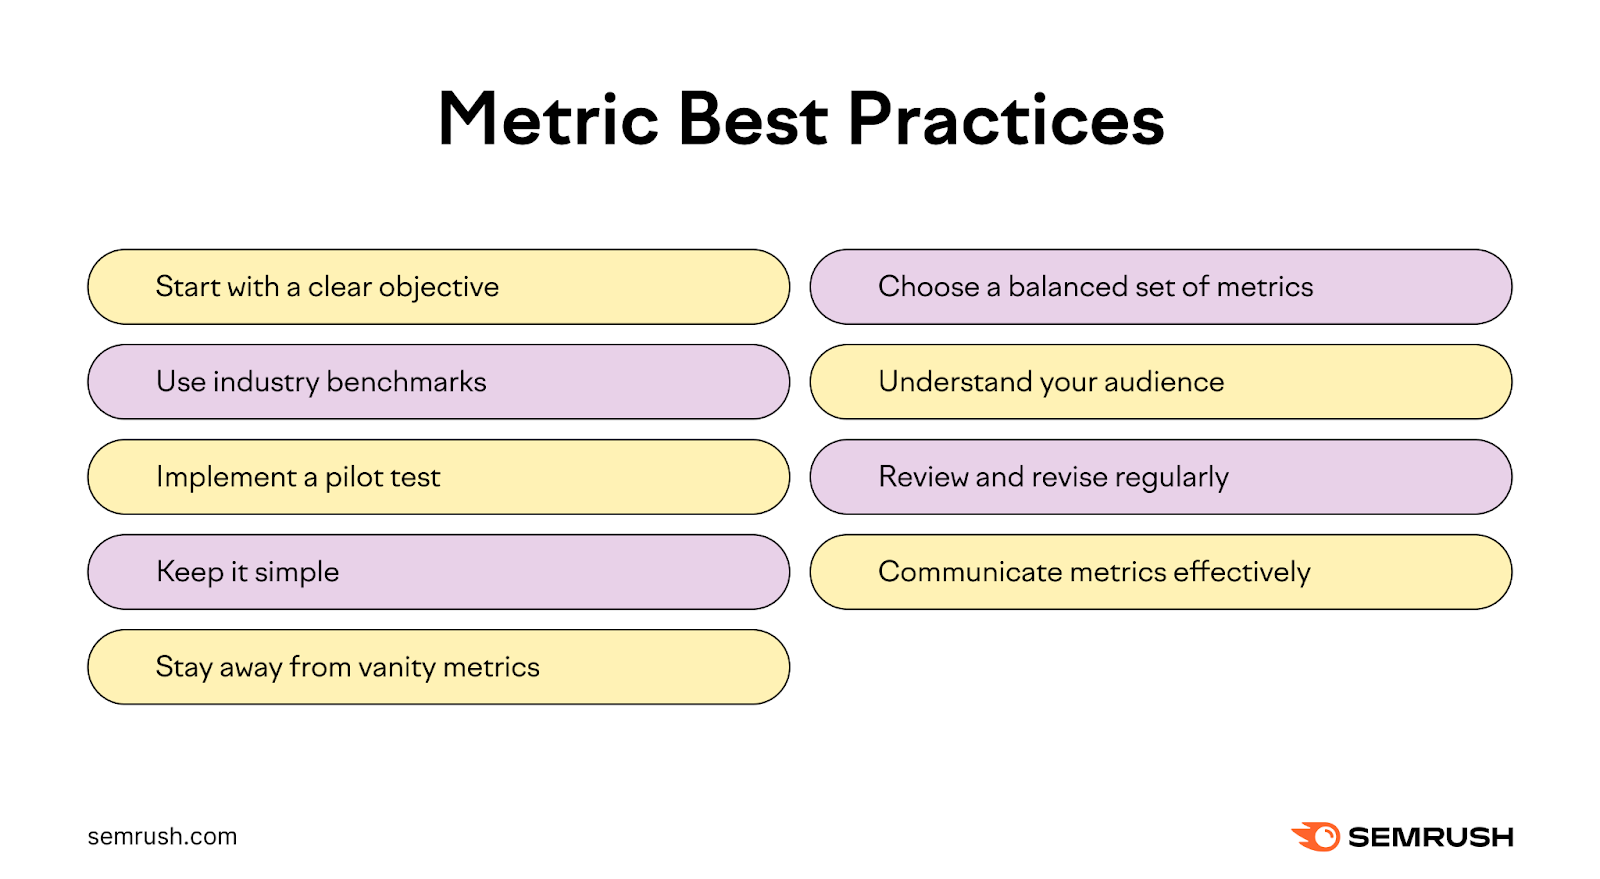 A list of metric best practices